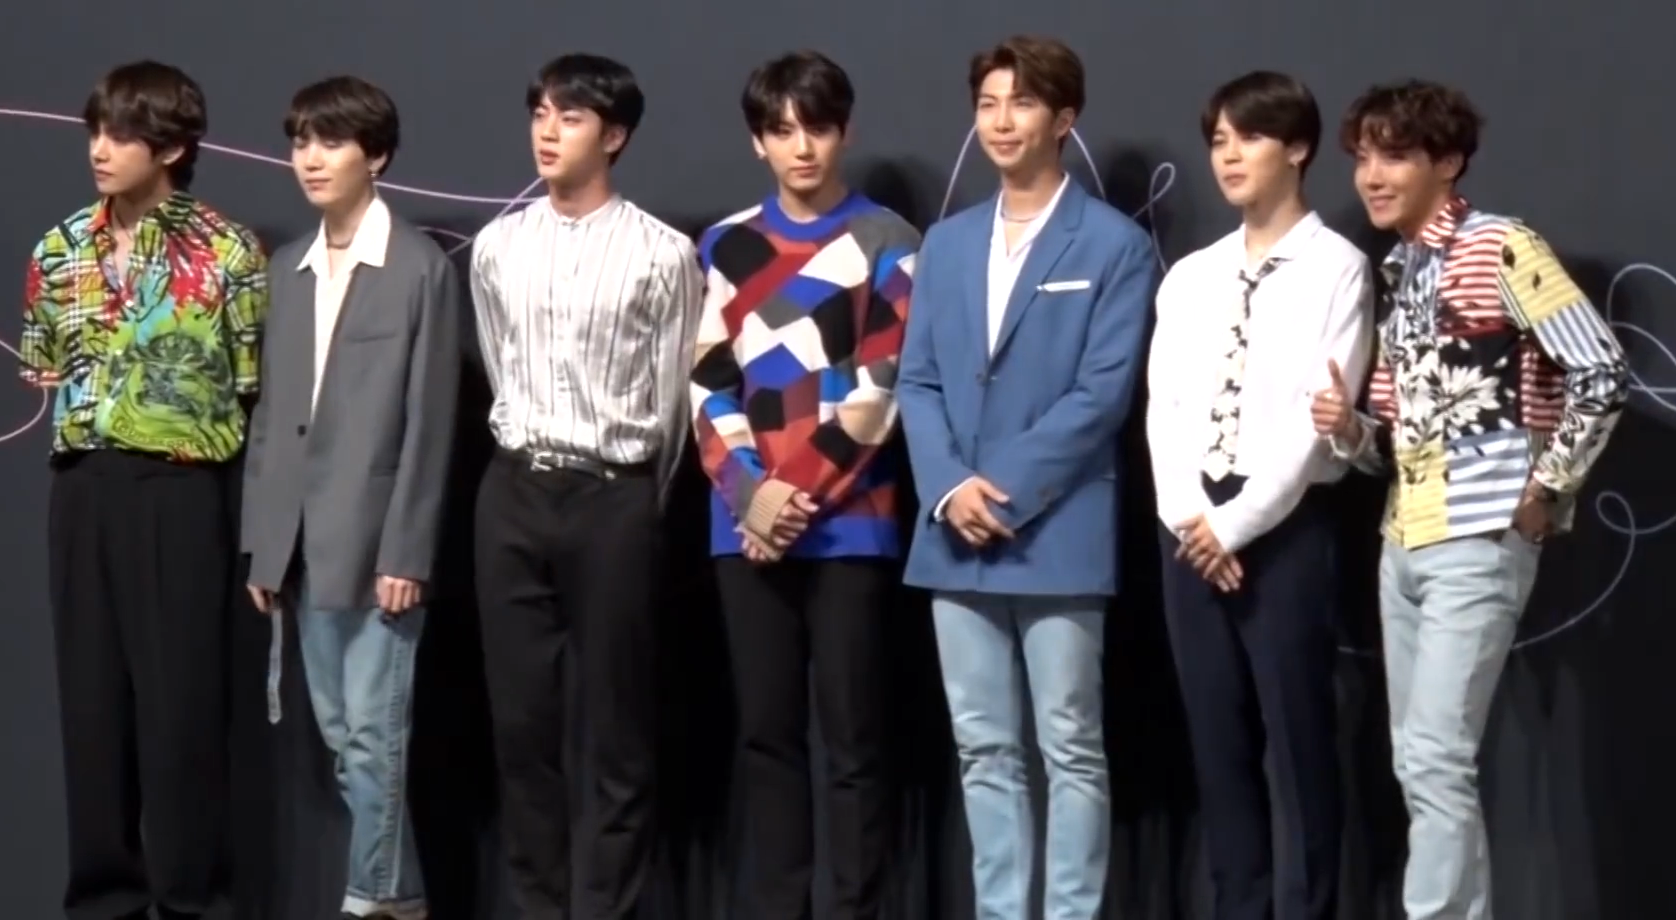 File:180524 BTS at a press conference for Love Yourself Tear (3).png.